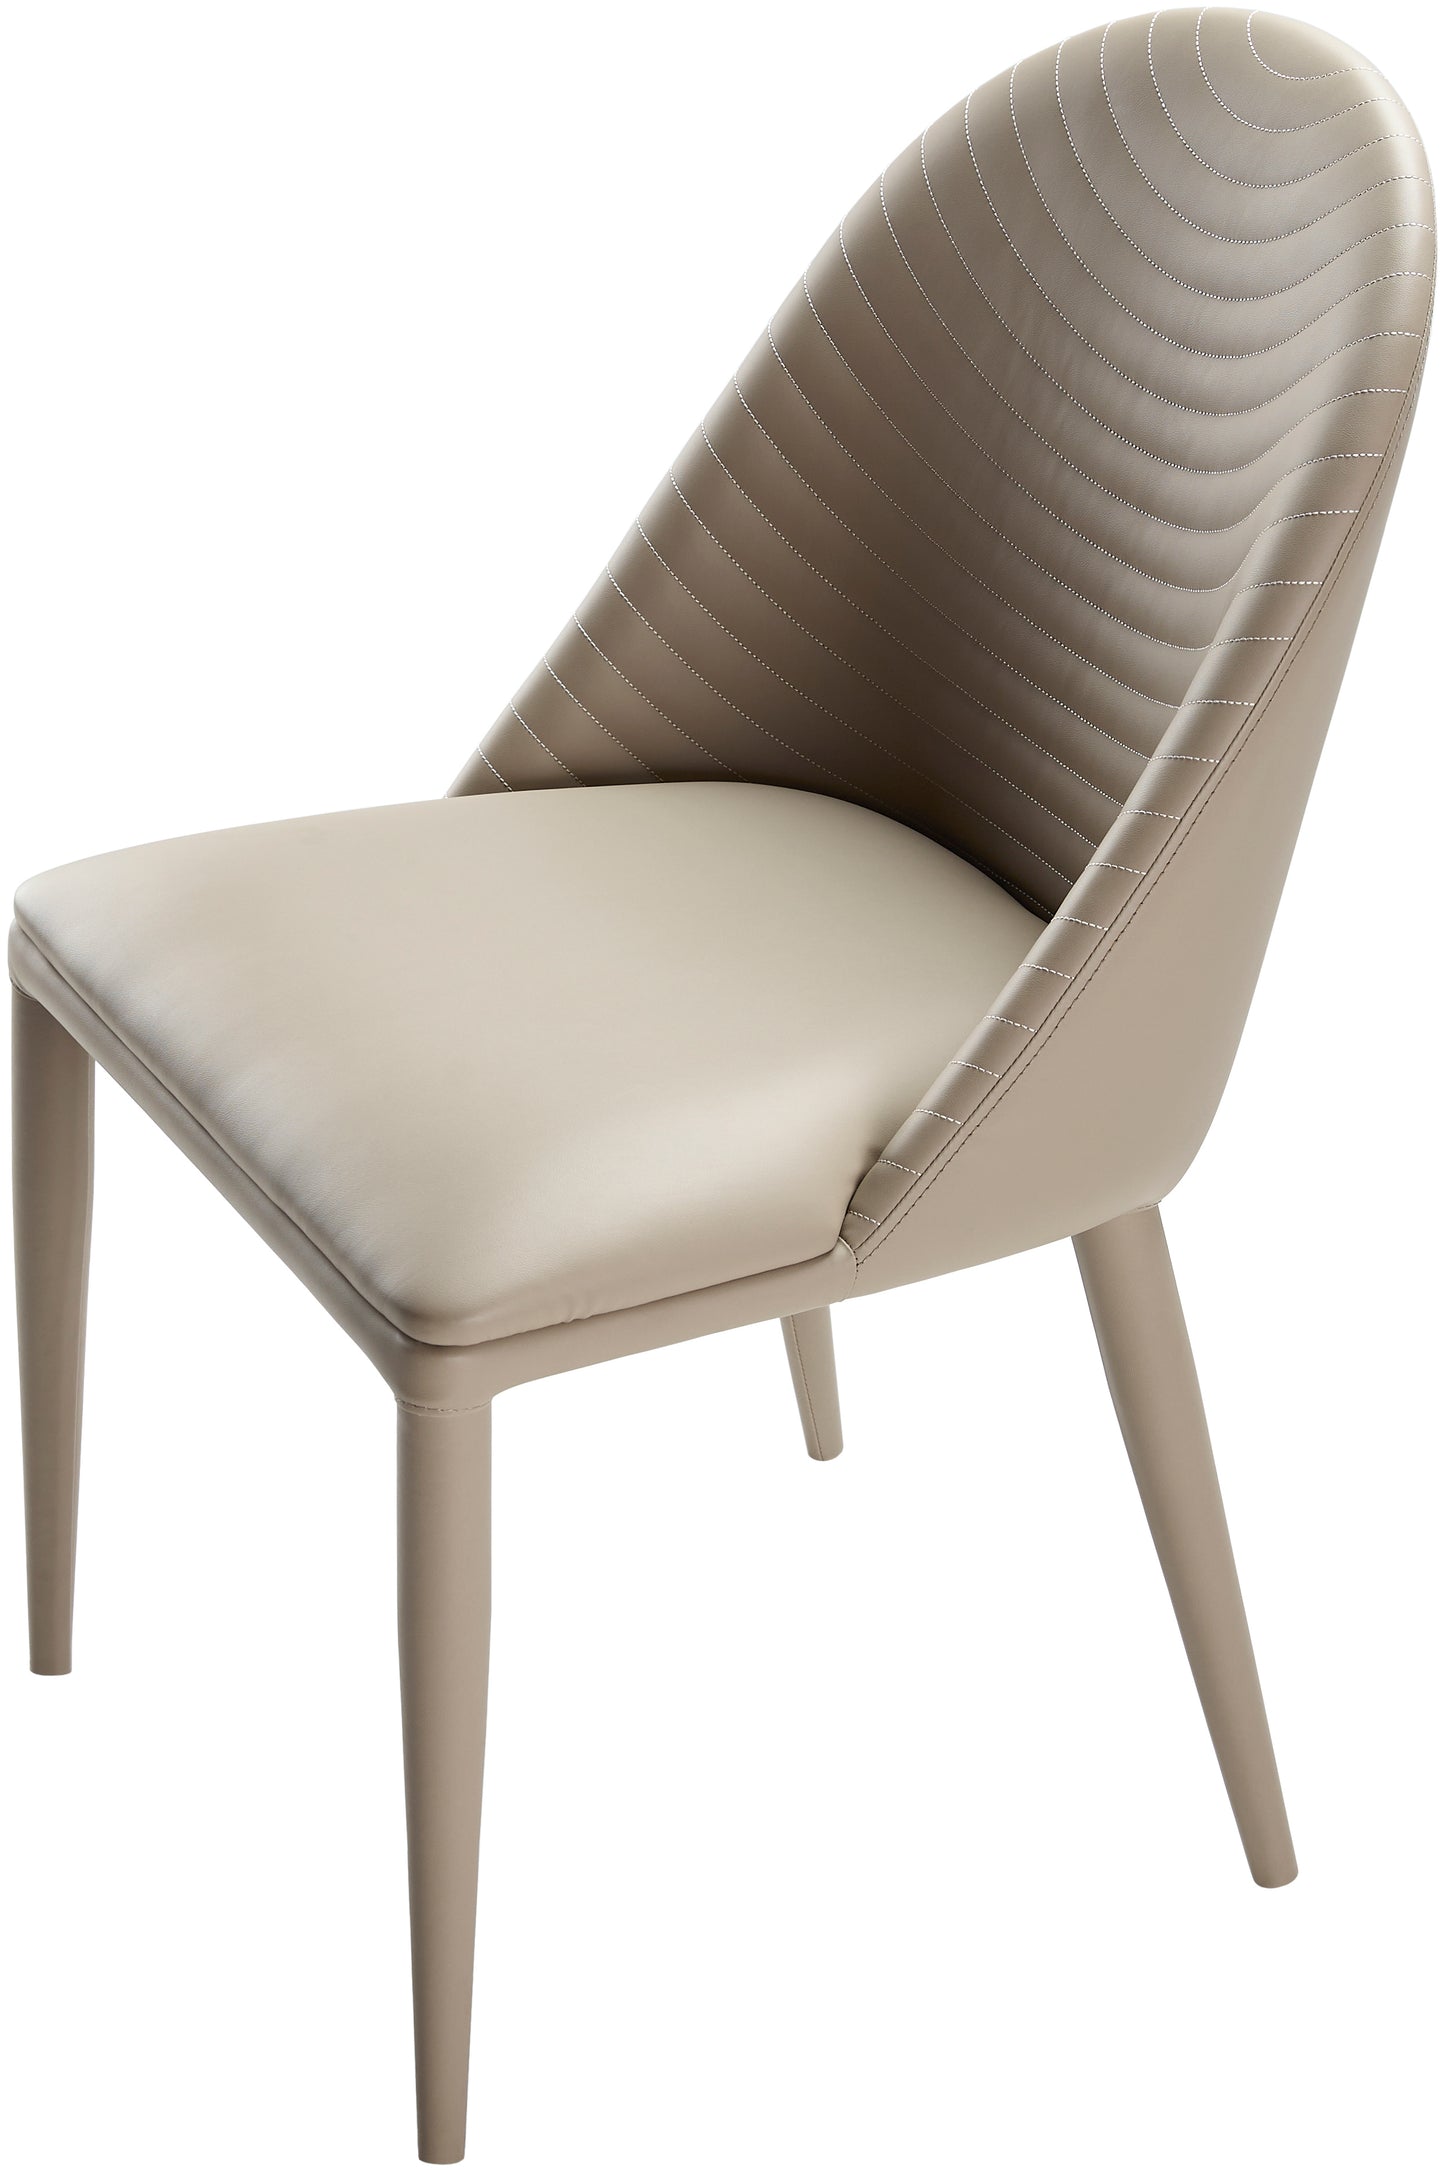 Sophie Faux Leather Dining Chair, Beige